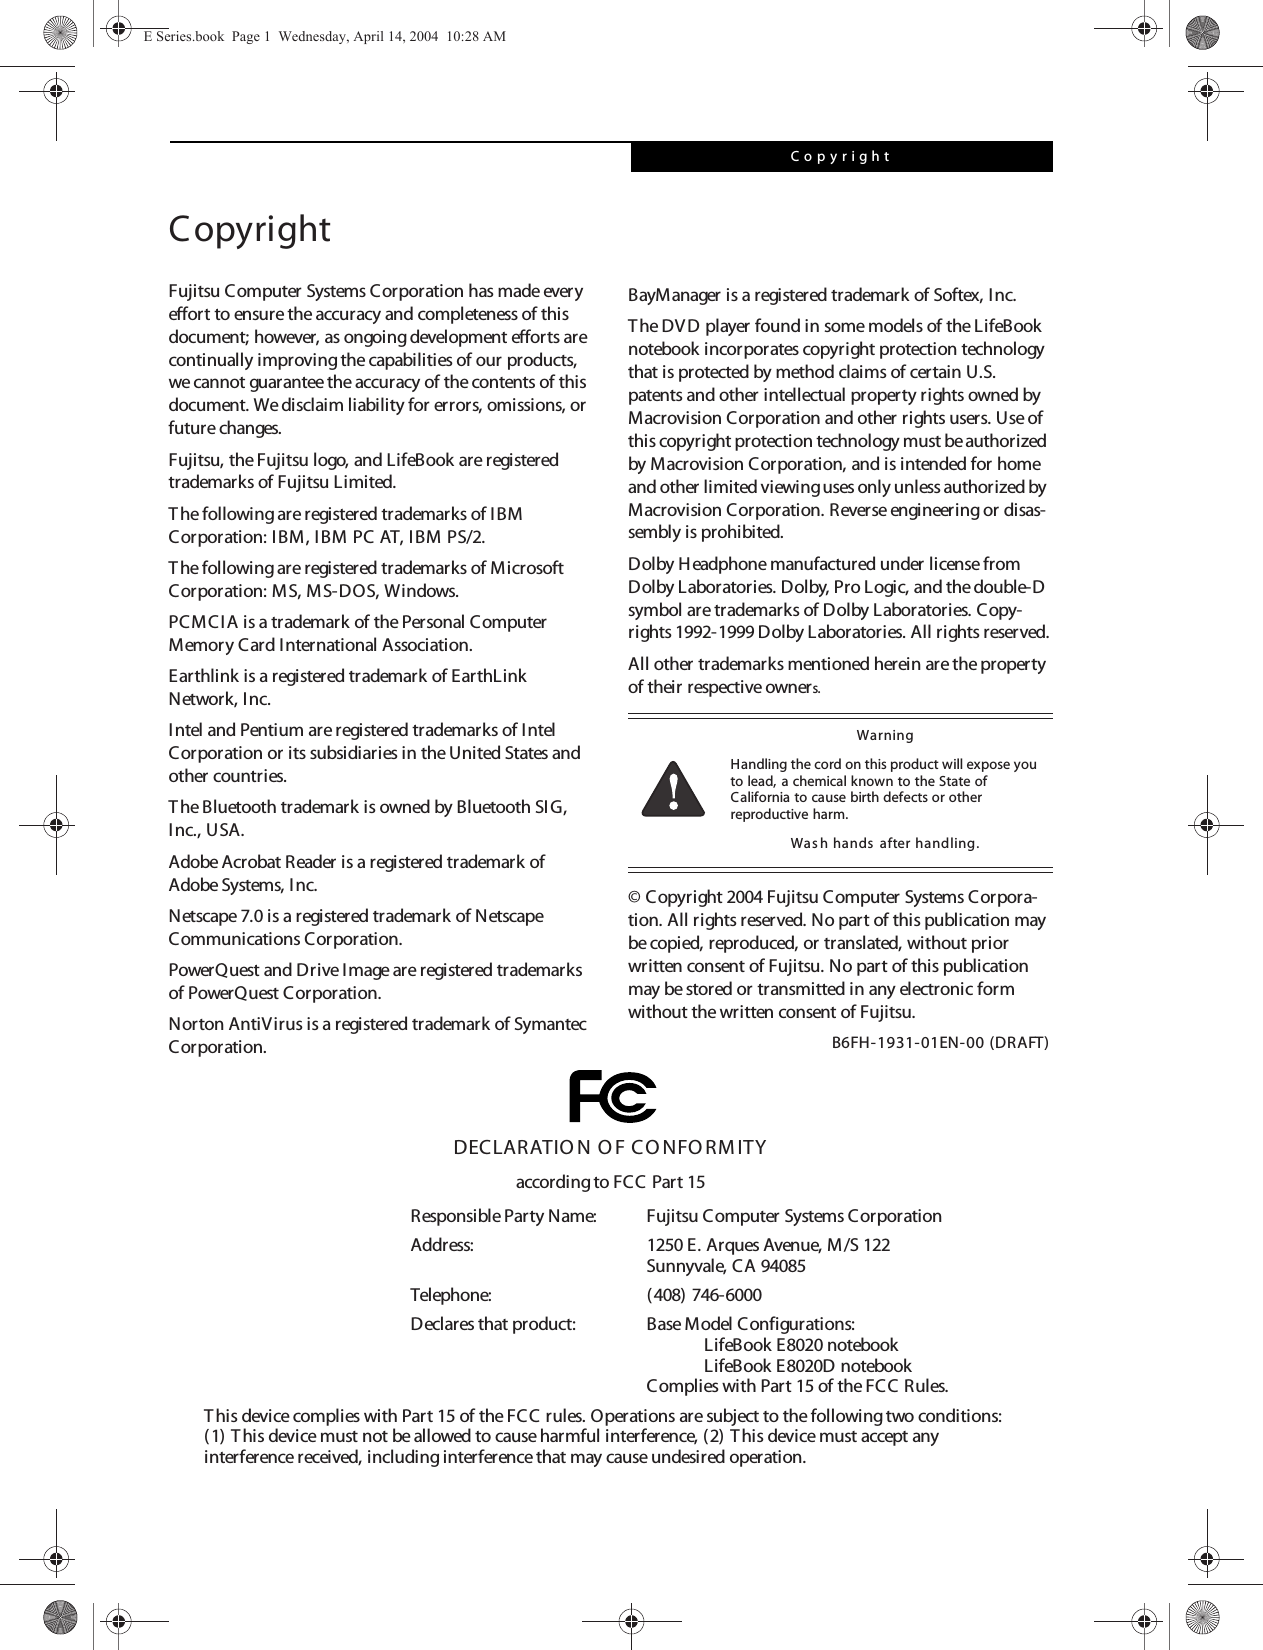 CopyrightCopyrightFujitsu Computer Systems Corporation has made every effort to ensure the accuracy and completeness of this document; however, as ongoing development efforts are continually improving the capabilities of our products, we cannot guarantee the accuracy of the contents of this document. We disclaim liability for errors, omissions, or future changes.Fujitsu, the Fujitsu logo, and LifeBook are registered trademarks of Fujitsu Limited.The following are registered trademarks of I BM Corporation: IBM, IBM PC AT, IBM PS/2. The following are registered trademarks of Microsoft Corporation: MS, MS-DOS, Windows.PCMCIA is a trademark of the Personal Computer Memory Card International Association.Earthlink is a registered trademark of EarthLink Network, Inc. Intel and Pentium are registered trademarks of Intel Corporation or its subsidiaries in the United States and other countries.The Bluetooth trademark is owned by Bluetooth SIG, Inc., USA.Adobe Acrobat Reader is a registered trademark of Adobe Systems, Inc.Netscape 7.0 is a registered trademark of Netscape Communications Corporation.PowerQuest and Drive Image are registered trademarks of PowerQuest Corporation.Norton AntiVirus is a registered trademark of Symantec Corporation.BayManager is a registered trademark of Softex, Inc.The DVD player found in some models of the LifeBook notebook incorporates copyright protection technology that is protected by method claims of certain U.S. patents and other intellectual property rights owned by Macrovision Corporation and other rights users. Use of this copyright protection technology must be authorized by Macrovision Corporation, and is intended for home and other limited viewing uses only unless authorized by Macrovision Corporation. Reverse engineering or disas-sembly is prohibited.Dolby Headphone manufactured under license from Dolby Laboratories. Dolby, Pro Logic, and the double-D symbol are trademarks of Dolby Laboratories. Copy-rights 1992-1999 Dolby Laboratories. All rights reserved.All other trademarks mentioned herein are the property of their respective owners.© Copyright 2004 Fujitsu Computer Systems Corpora-tion. All rights reserved. No part of this publication may be copied, reproduced, or translated, without prior written consent of Fujitsu. No part of this publication may be stored or transmitted in any electronic form without the written consent of Fujitsu.B6FH-1931-01EN-00 (DRAFT)War ningHandling the cord on this product will expose you to lead, a chemical known to the State of California to cause birth defects or other reproductive harm. Was h hands  after handling.DECLARATIO N O F CO NFO RM ITYaccording to FCC Part 15Responsible Party Name: Fujitsu Computer Systems CorporationAddress:  1250 E. Arques Avenue, M/S 122Sunnyvale, CA 94085Telephone: (408) 746-6000Declares that product: Base Model Configurations:LifeBook E8020 notebookLifeBook E8020D notebookComplies with Part 15 of the FCC Rules.This device complies with Part 15 of the FCC rules. Operations are subject to the following two conditions:(1) T his device must not be allowed to cause harmful interference, (2) T his device must accept anyinterference received, including interference that may cause undesired operation.E Series.book  Page 1  Wednesday, April 14, 2004  10:28 AM